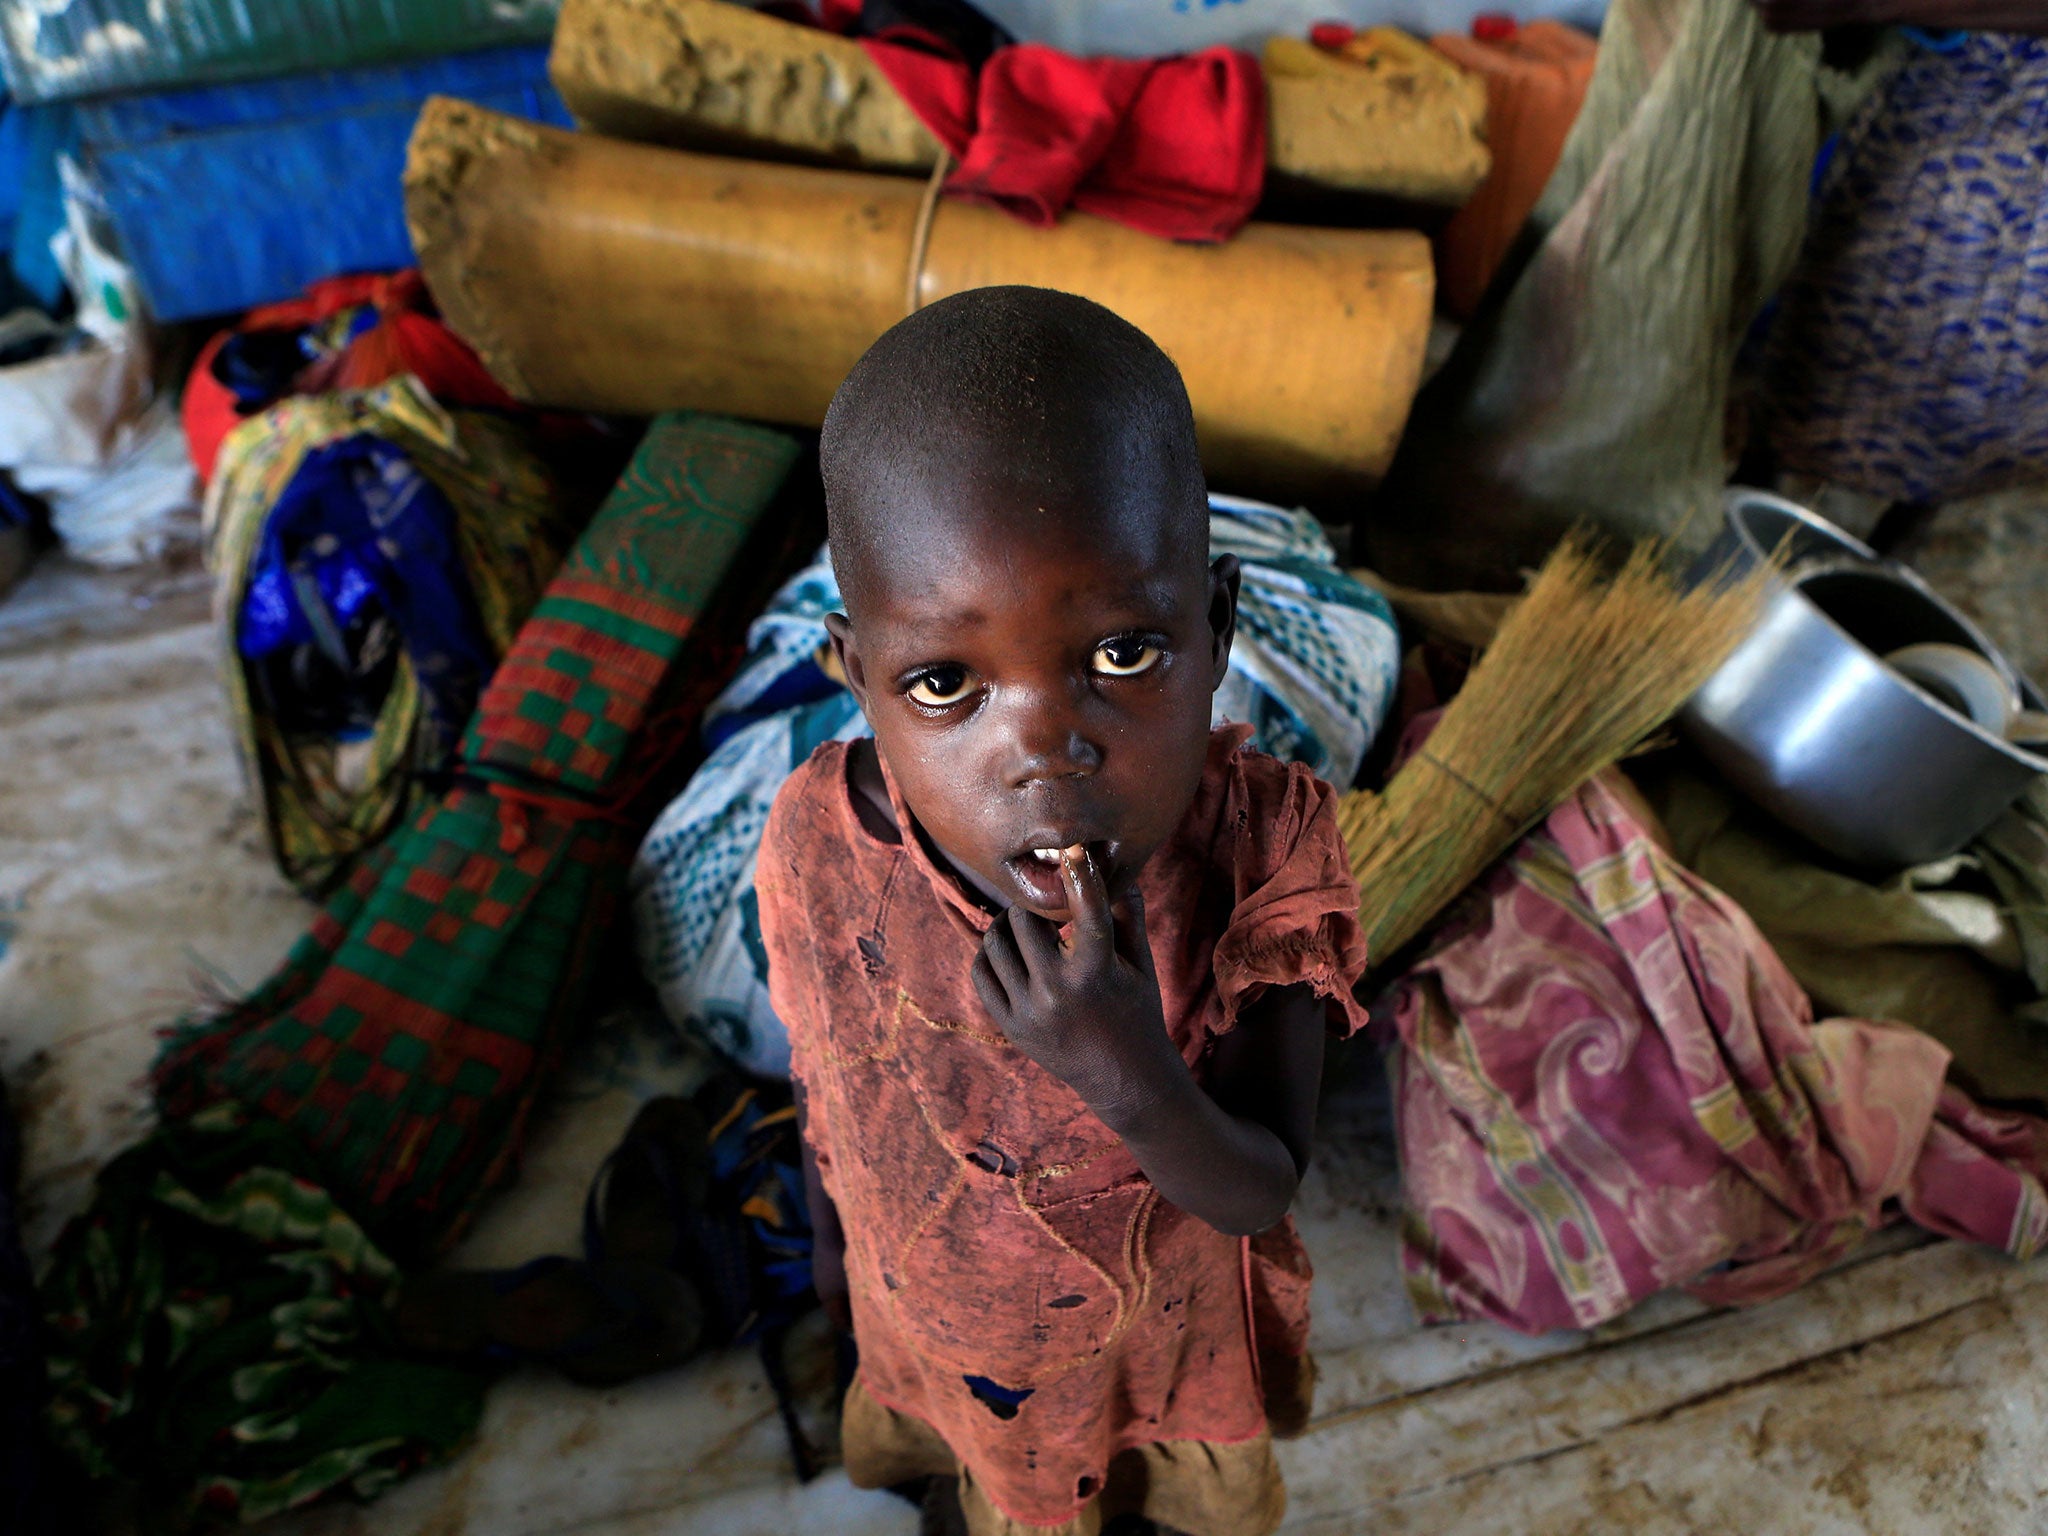 A displaced boy from South Sudan stands next to family belongings in Lamwo after fleeing fighting in Pajok town across the border in northern Uganda